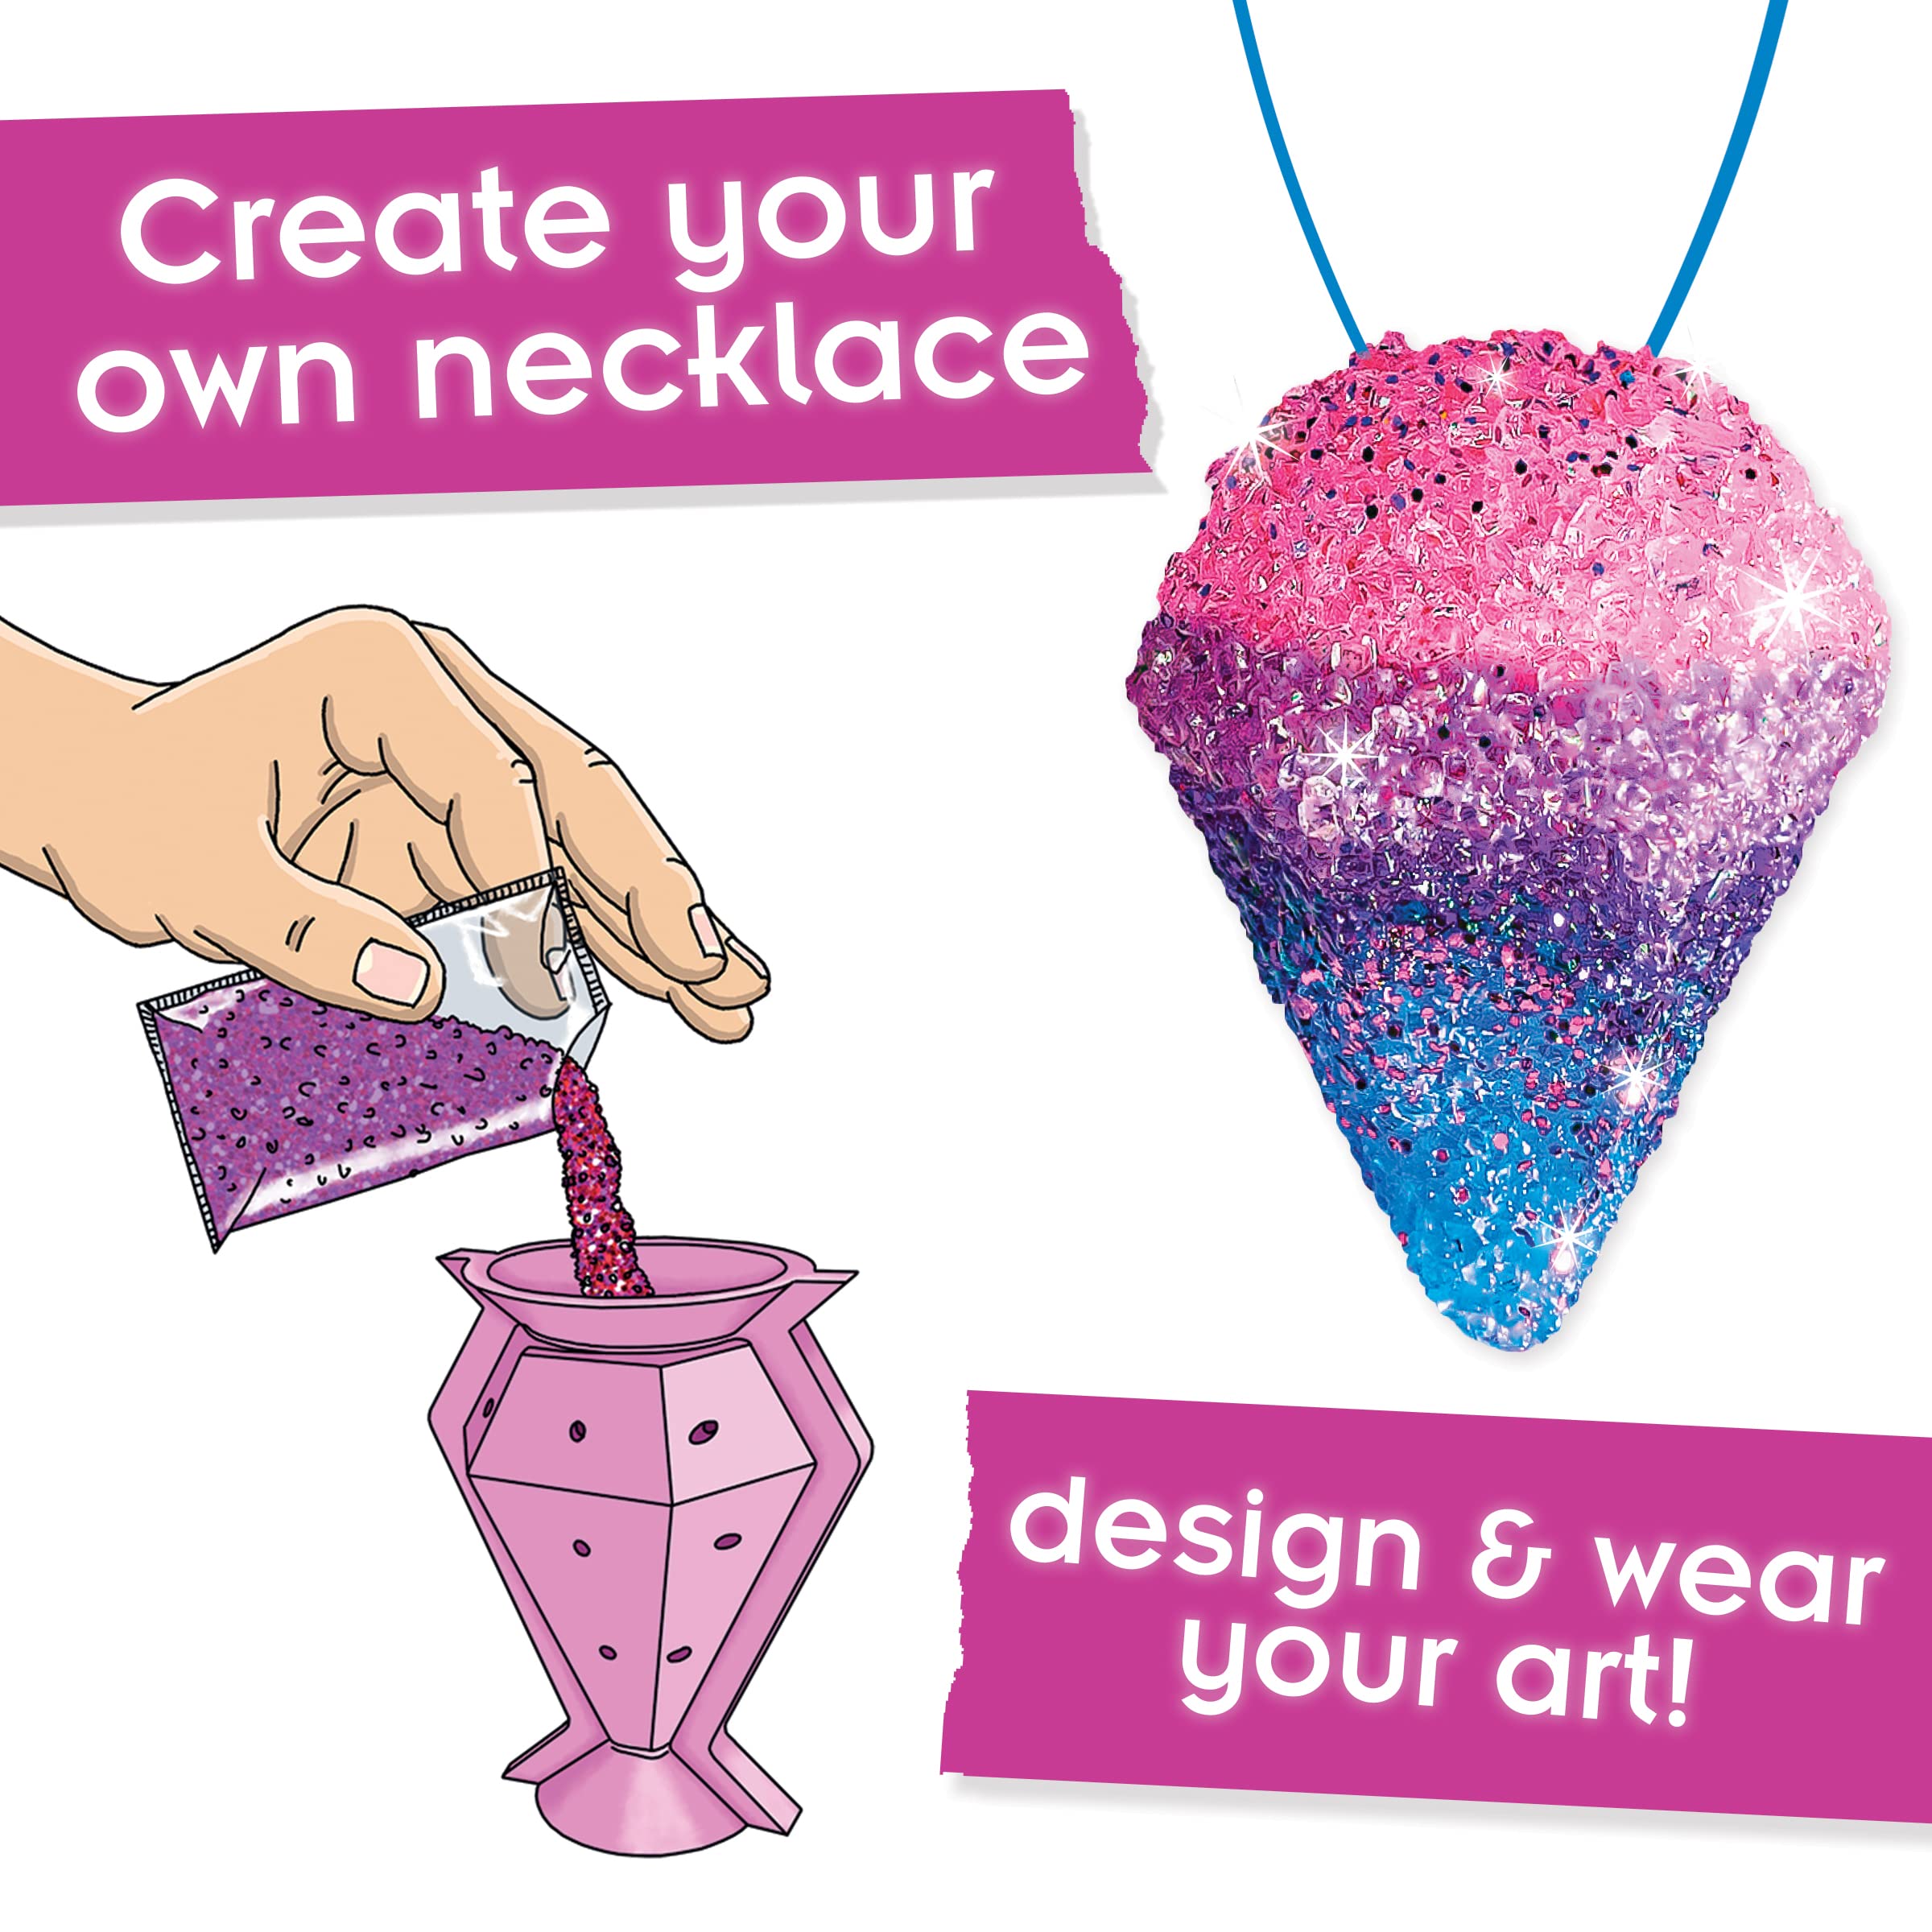 Thames & Kosmos Make Your Own Glitter Diamond Necklaces STEM Experiment Kit | Make up to 9 Glitter Diamonds & Design & Wear Your Art! | DIY Activity, Explore Science of Crystals & Diamonds